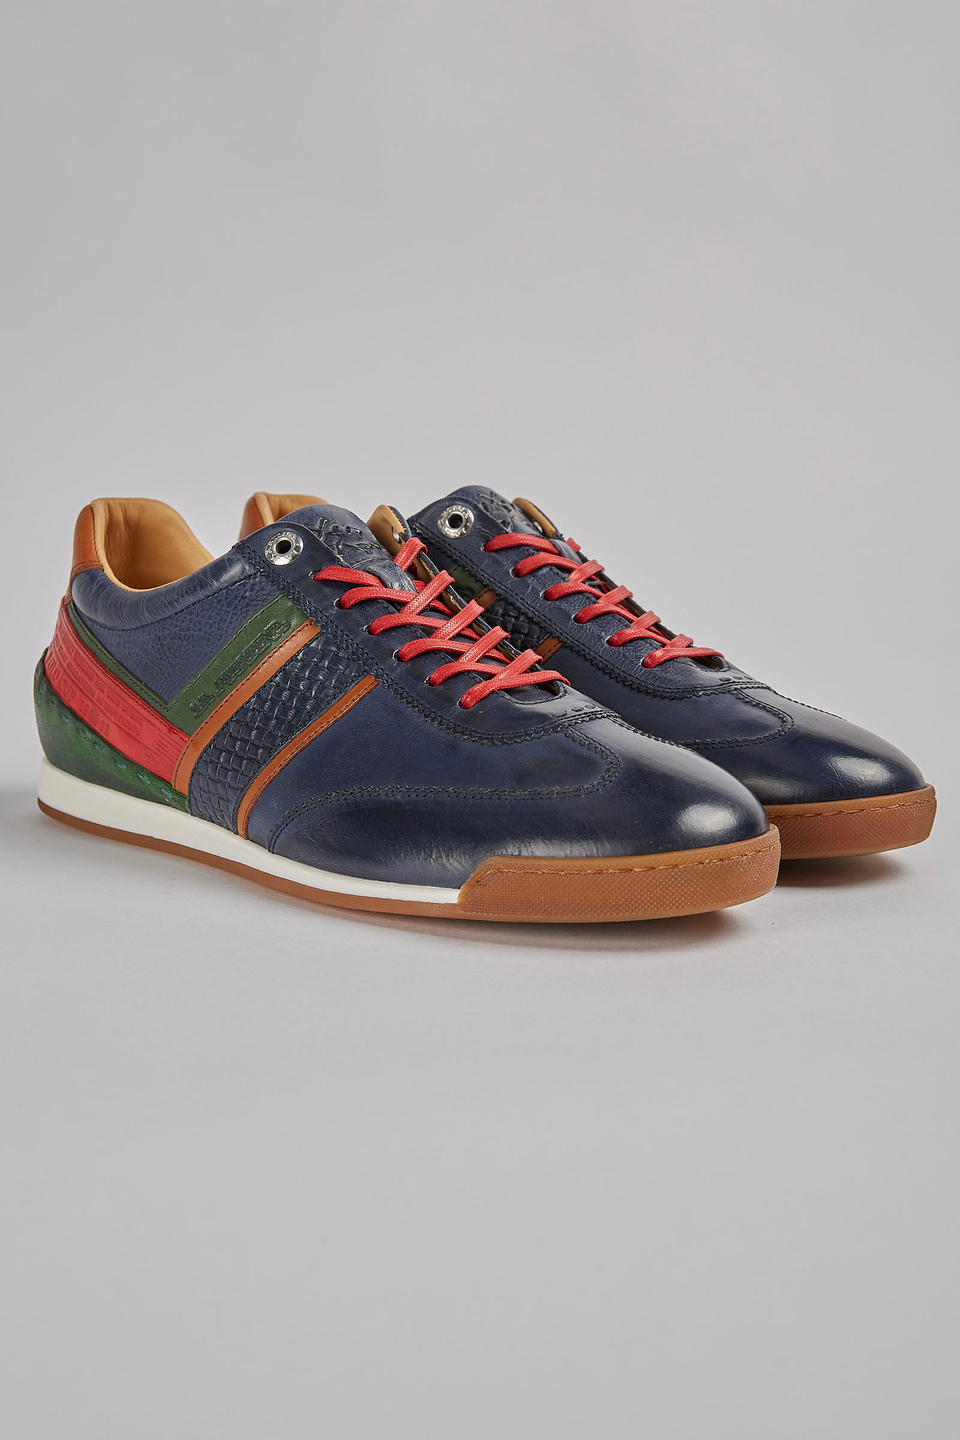 Mixed leather sneaker - La Martina - Official Online Shop